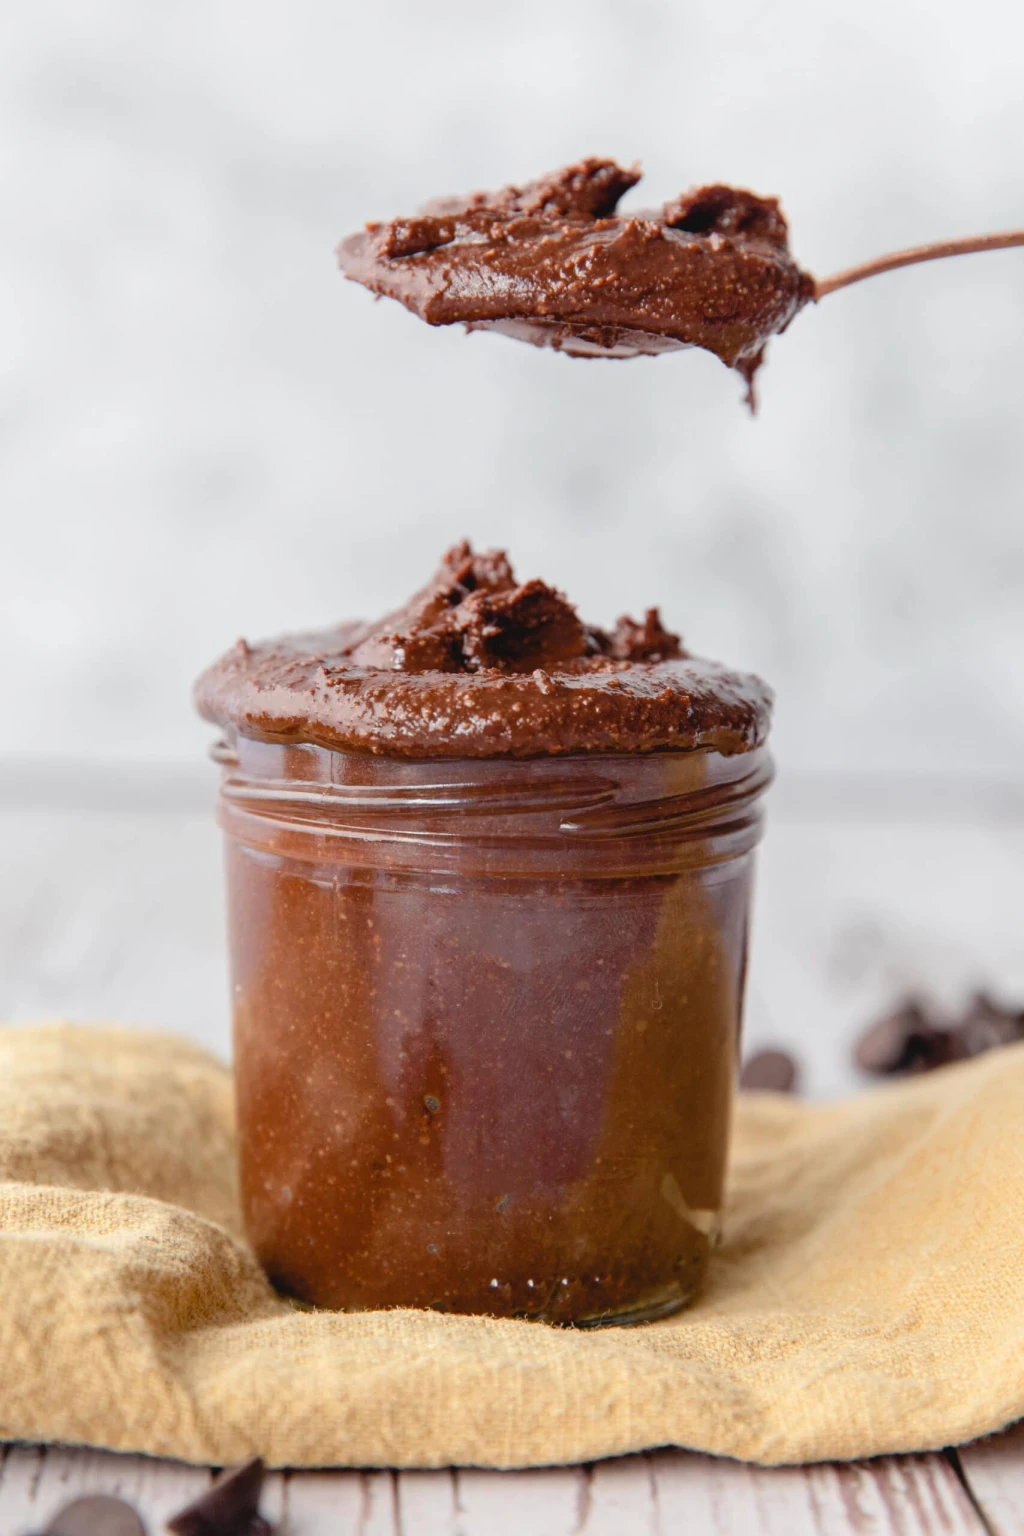 Indulge in this healthier version of the homemade Nutella!